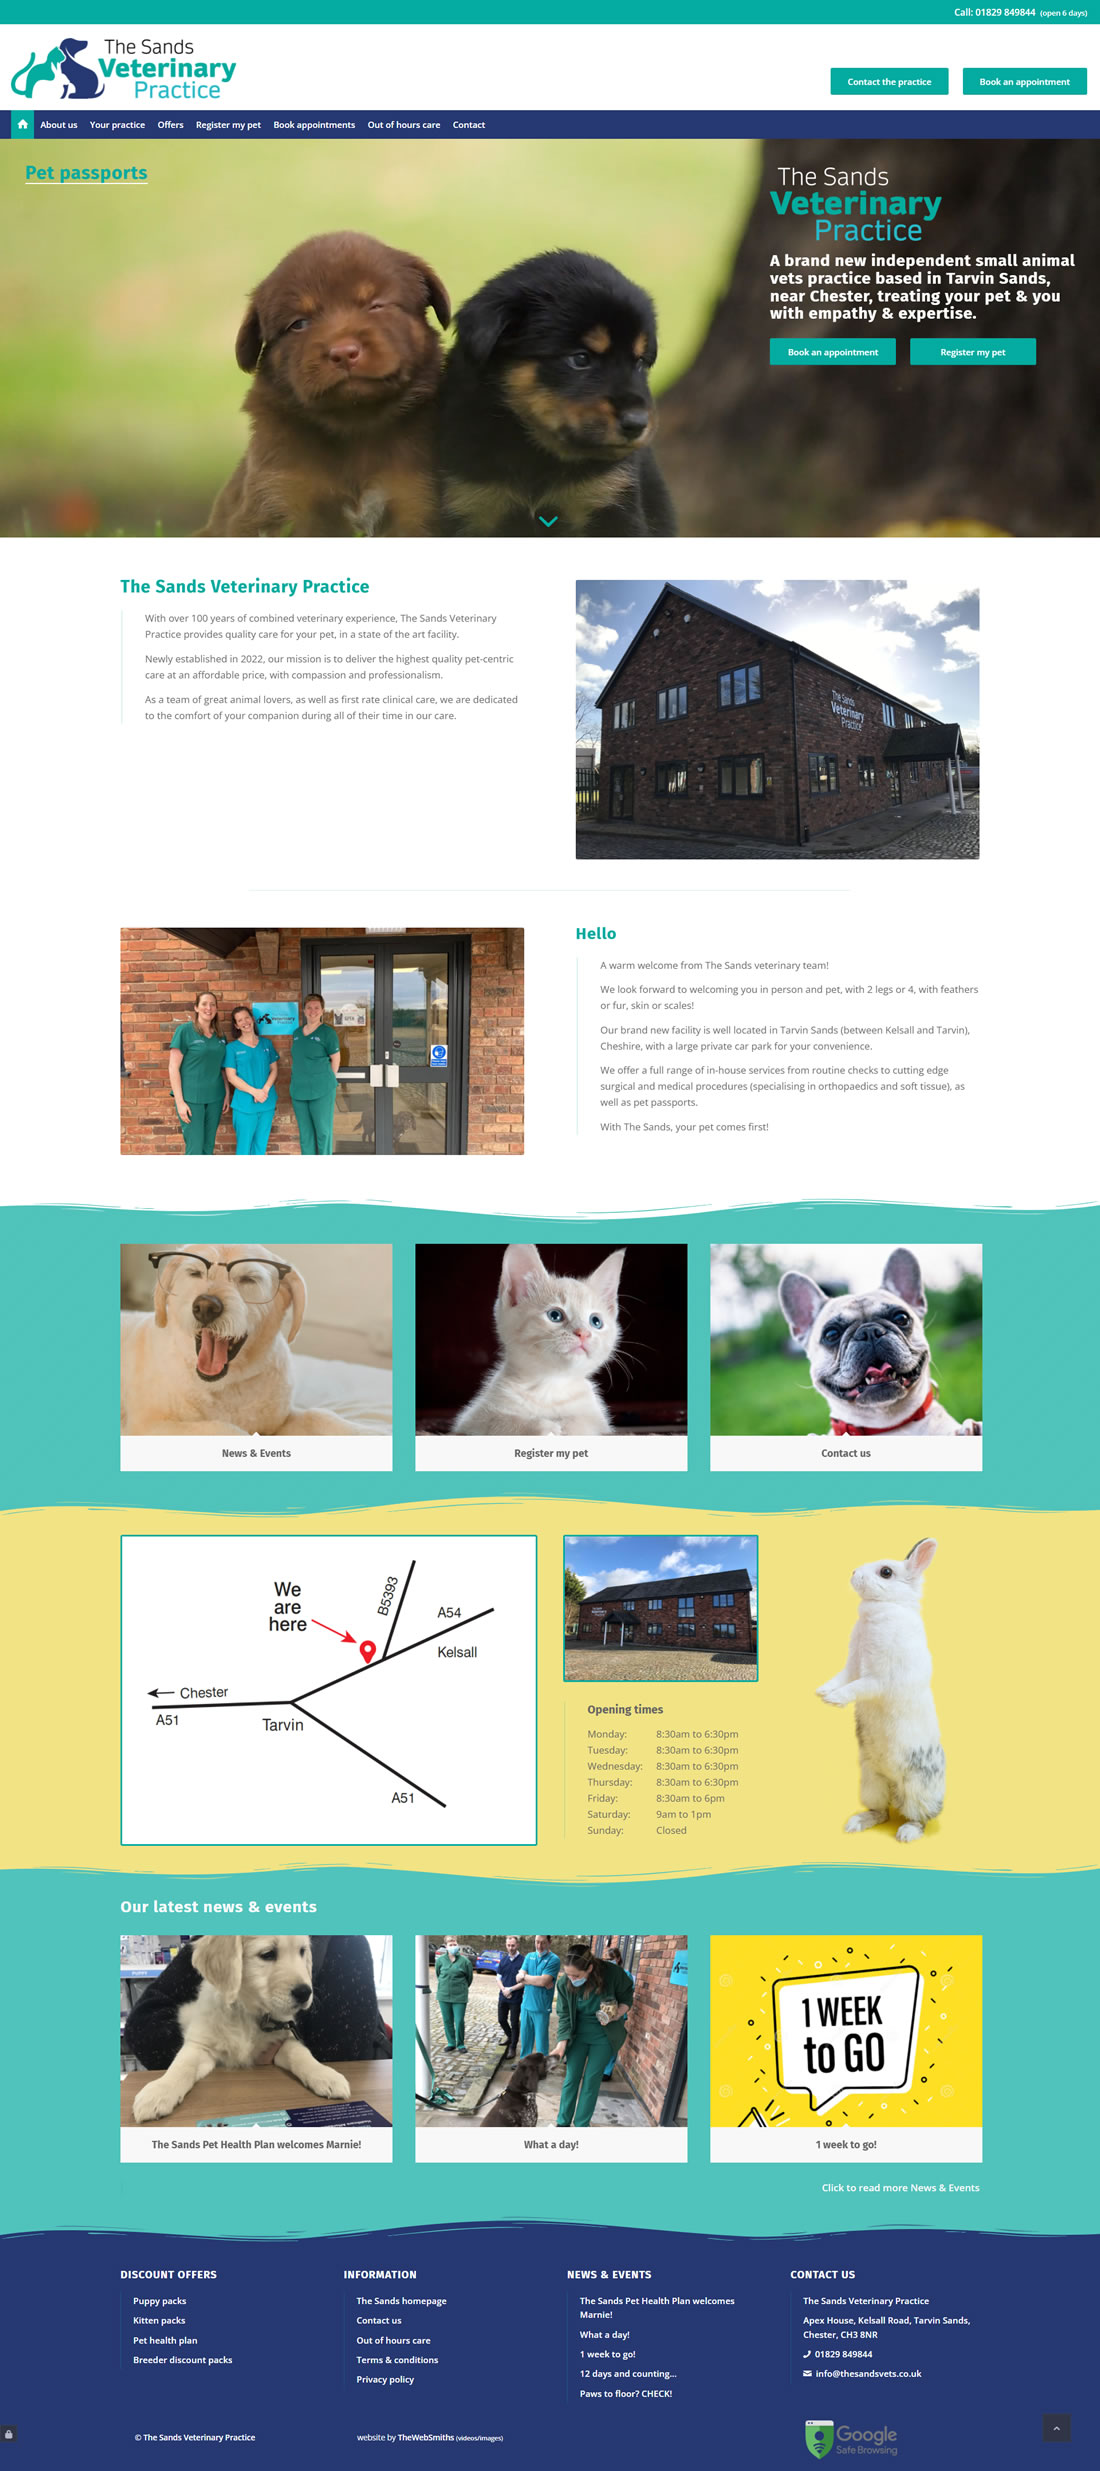 A new website for The Sands Veterinary Practice